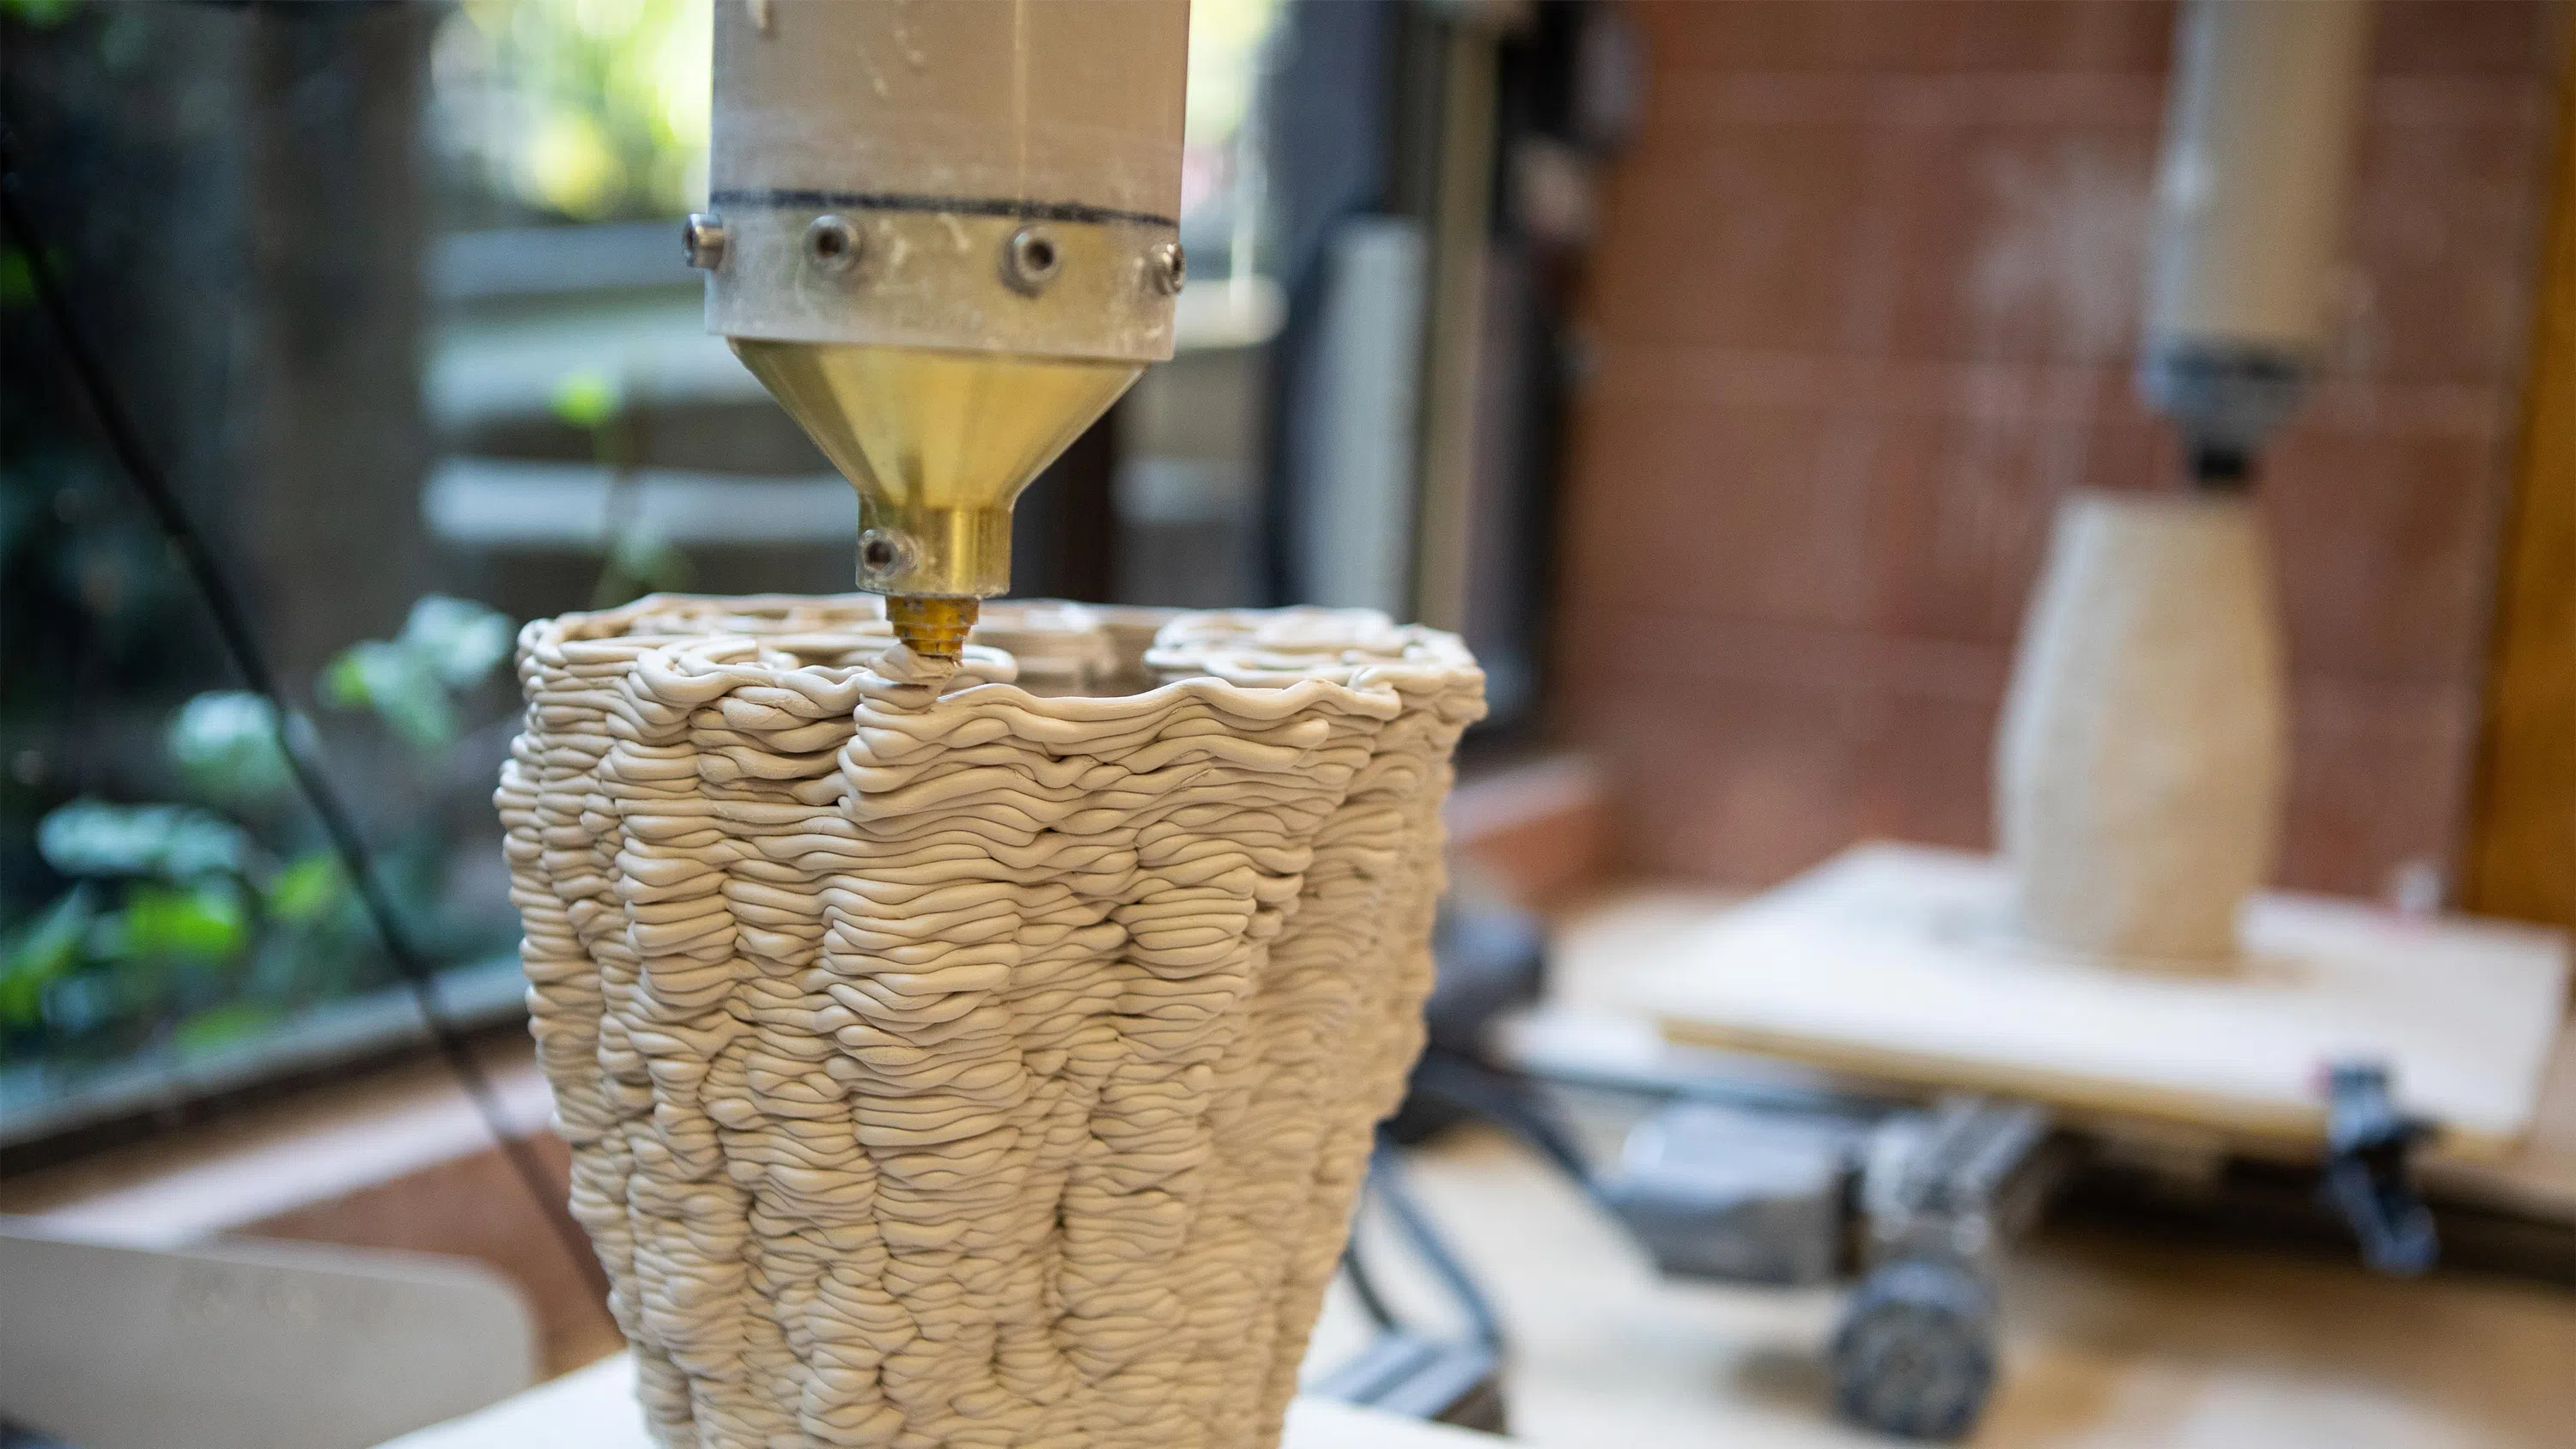 A close-up of a work-in-progress 3D printed clay vessel being extruded.